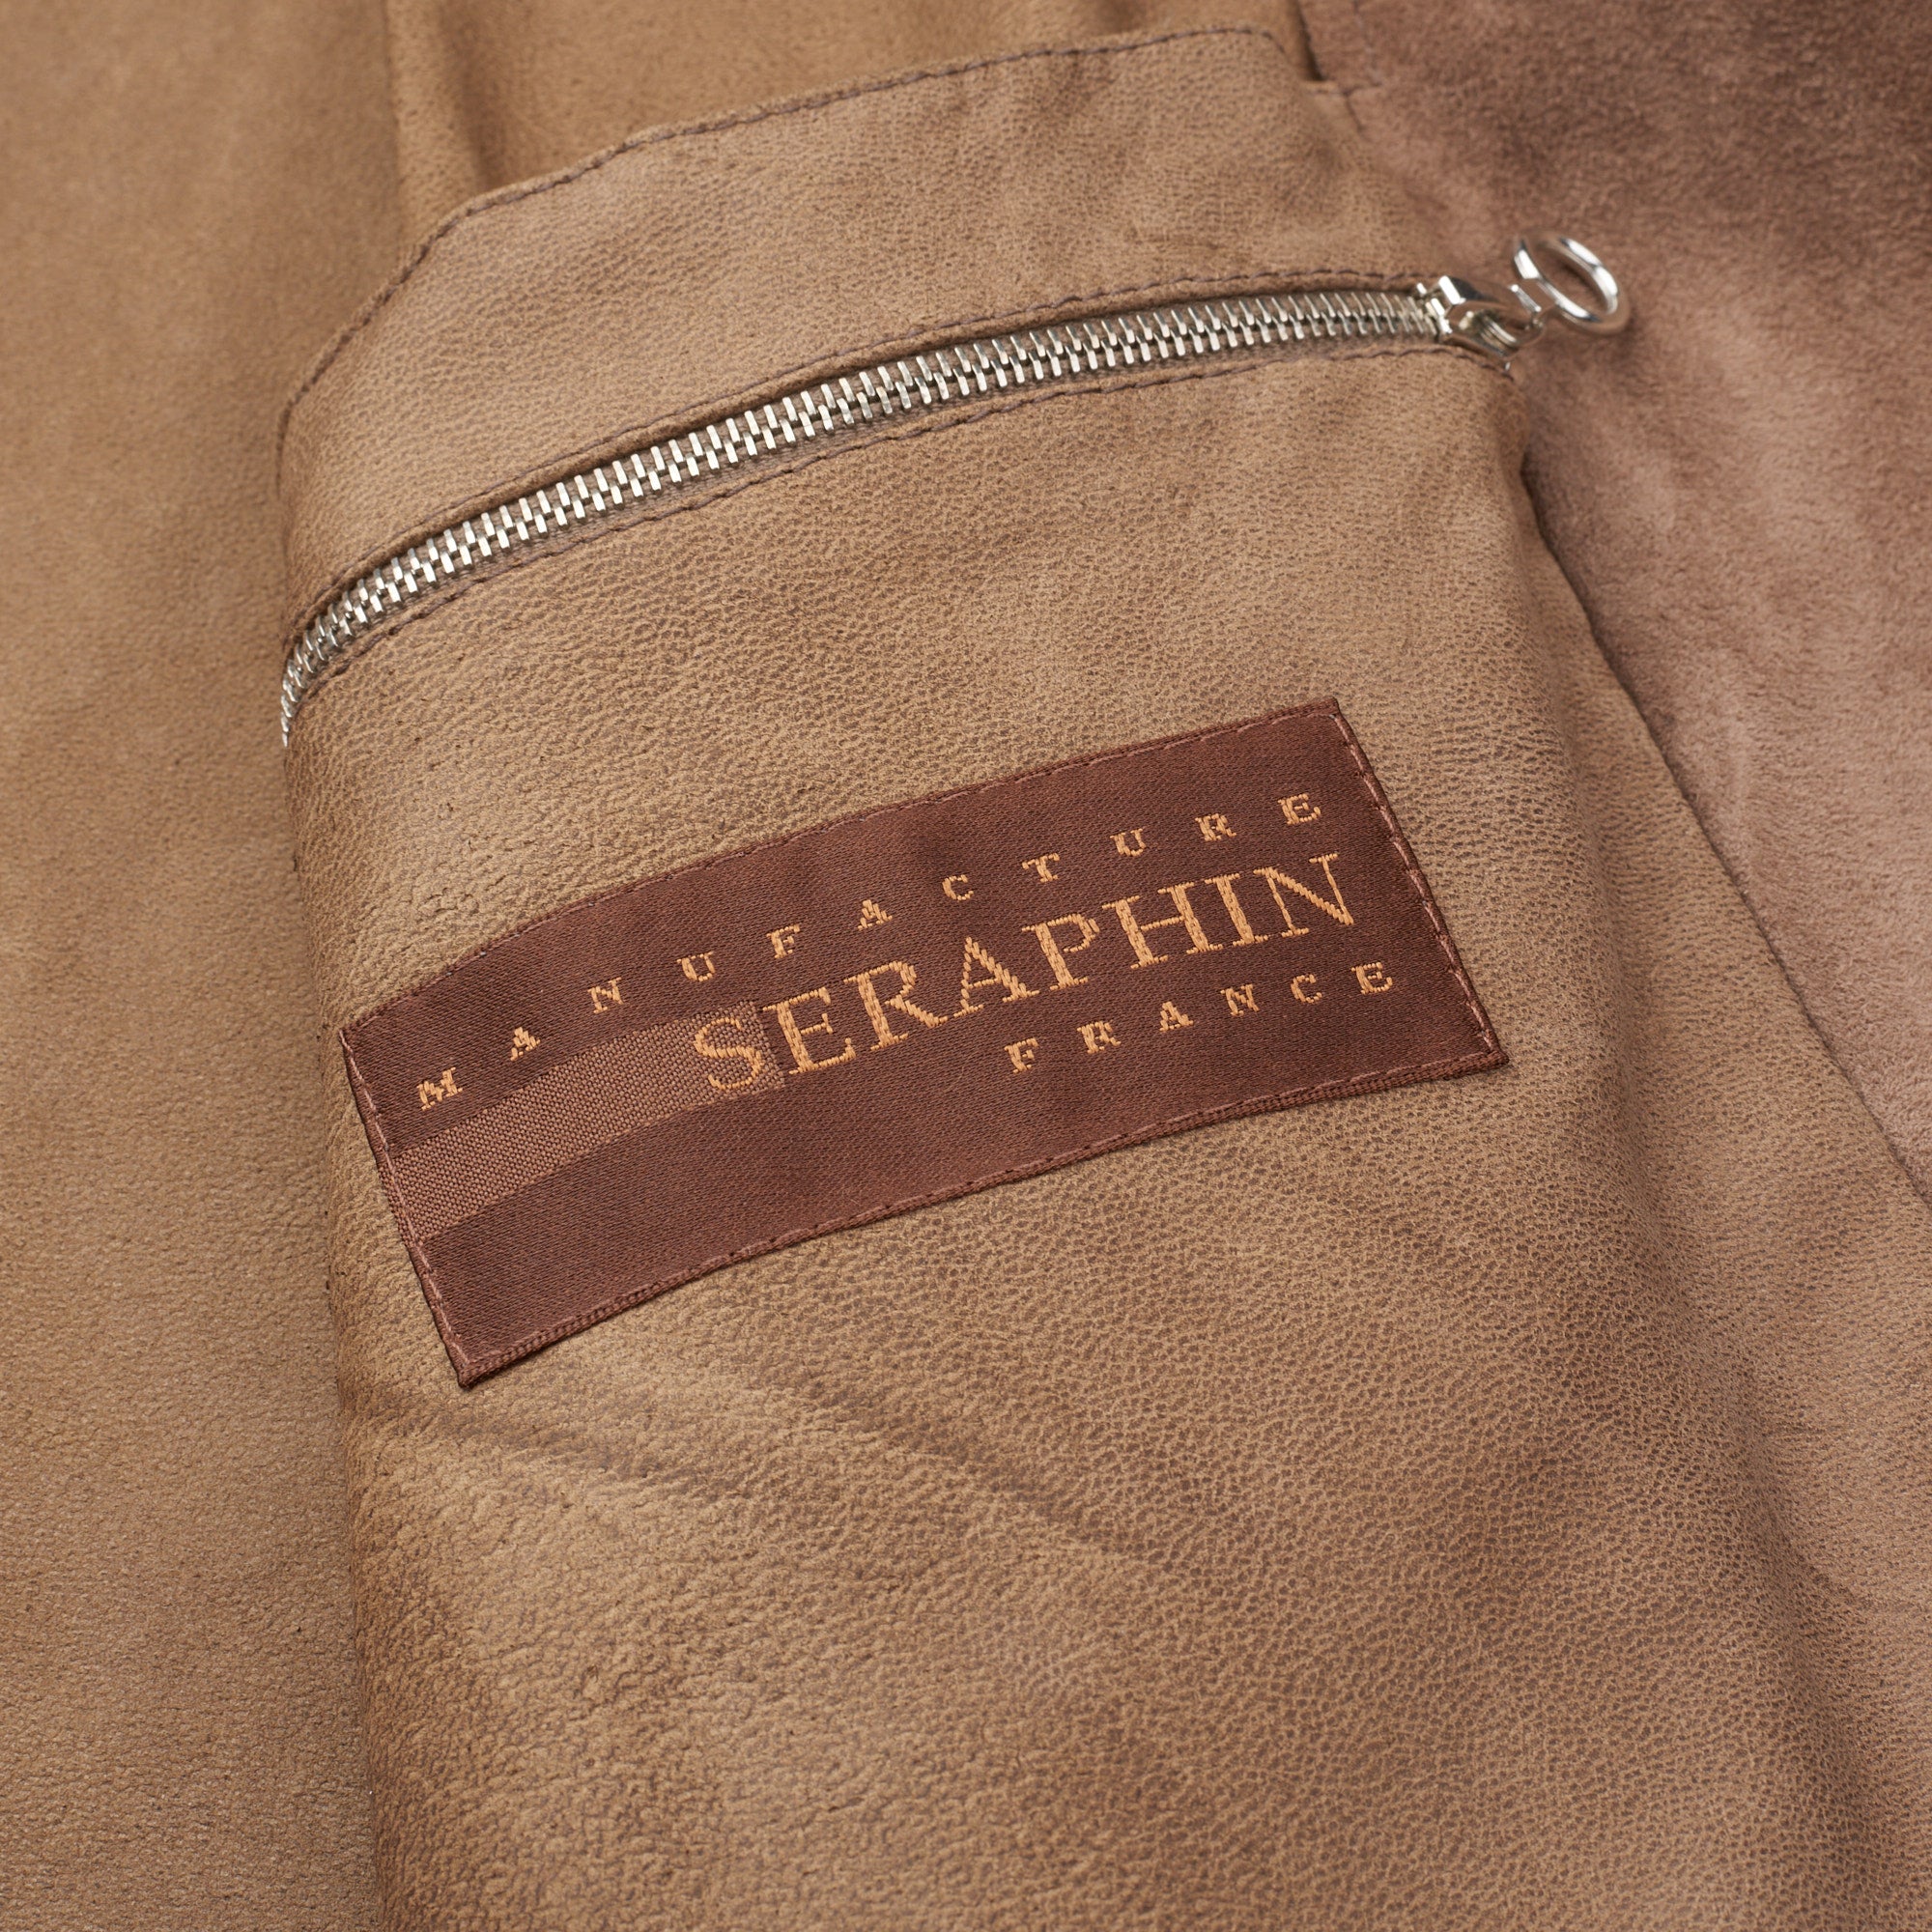 SERAPHIN Brown Suede Goat Leather Unlined Cafe Racer Biker Jacket FR 50 US M SERAPHIN